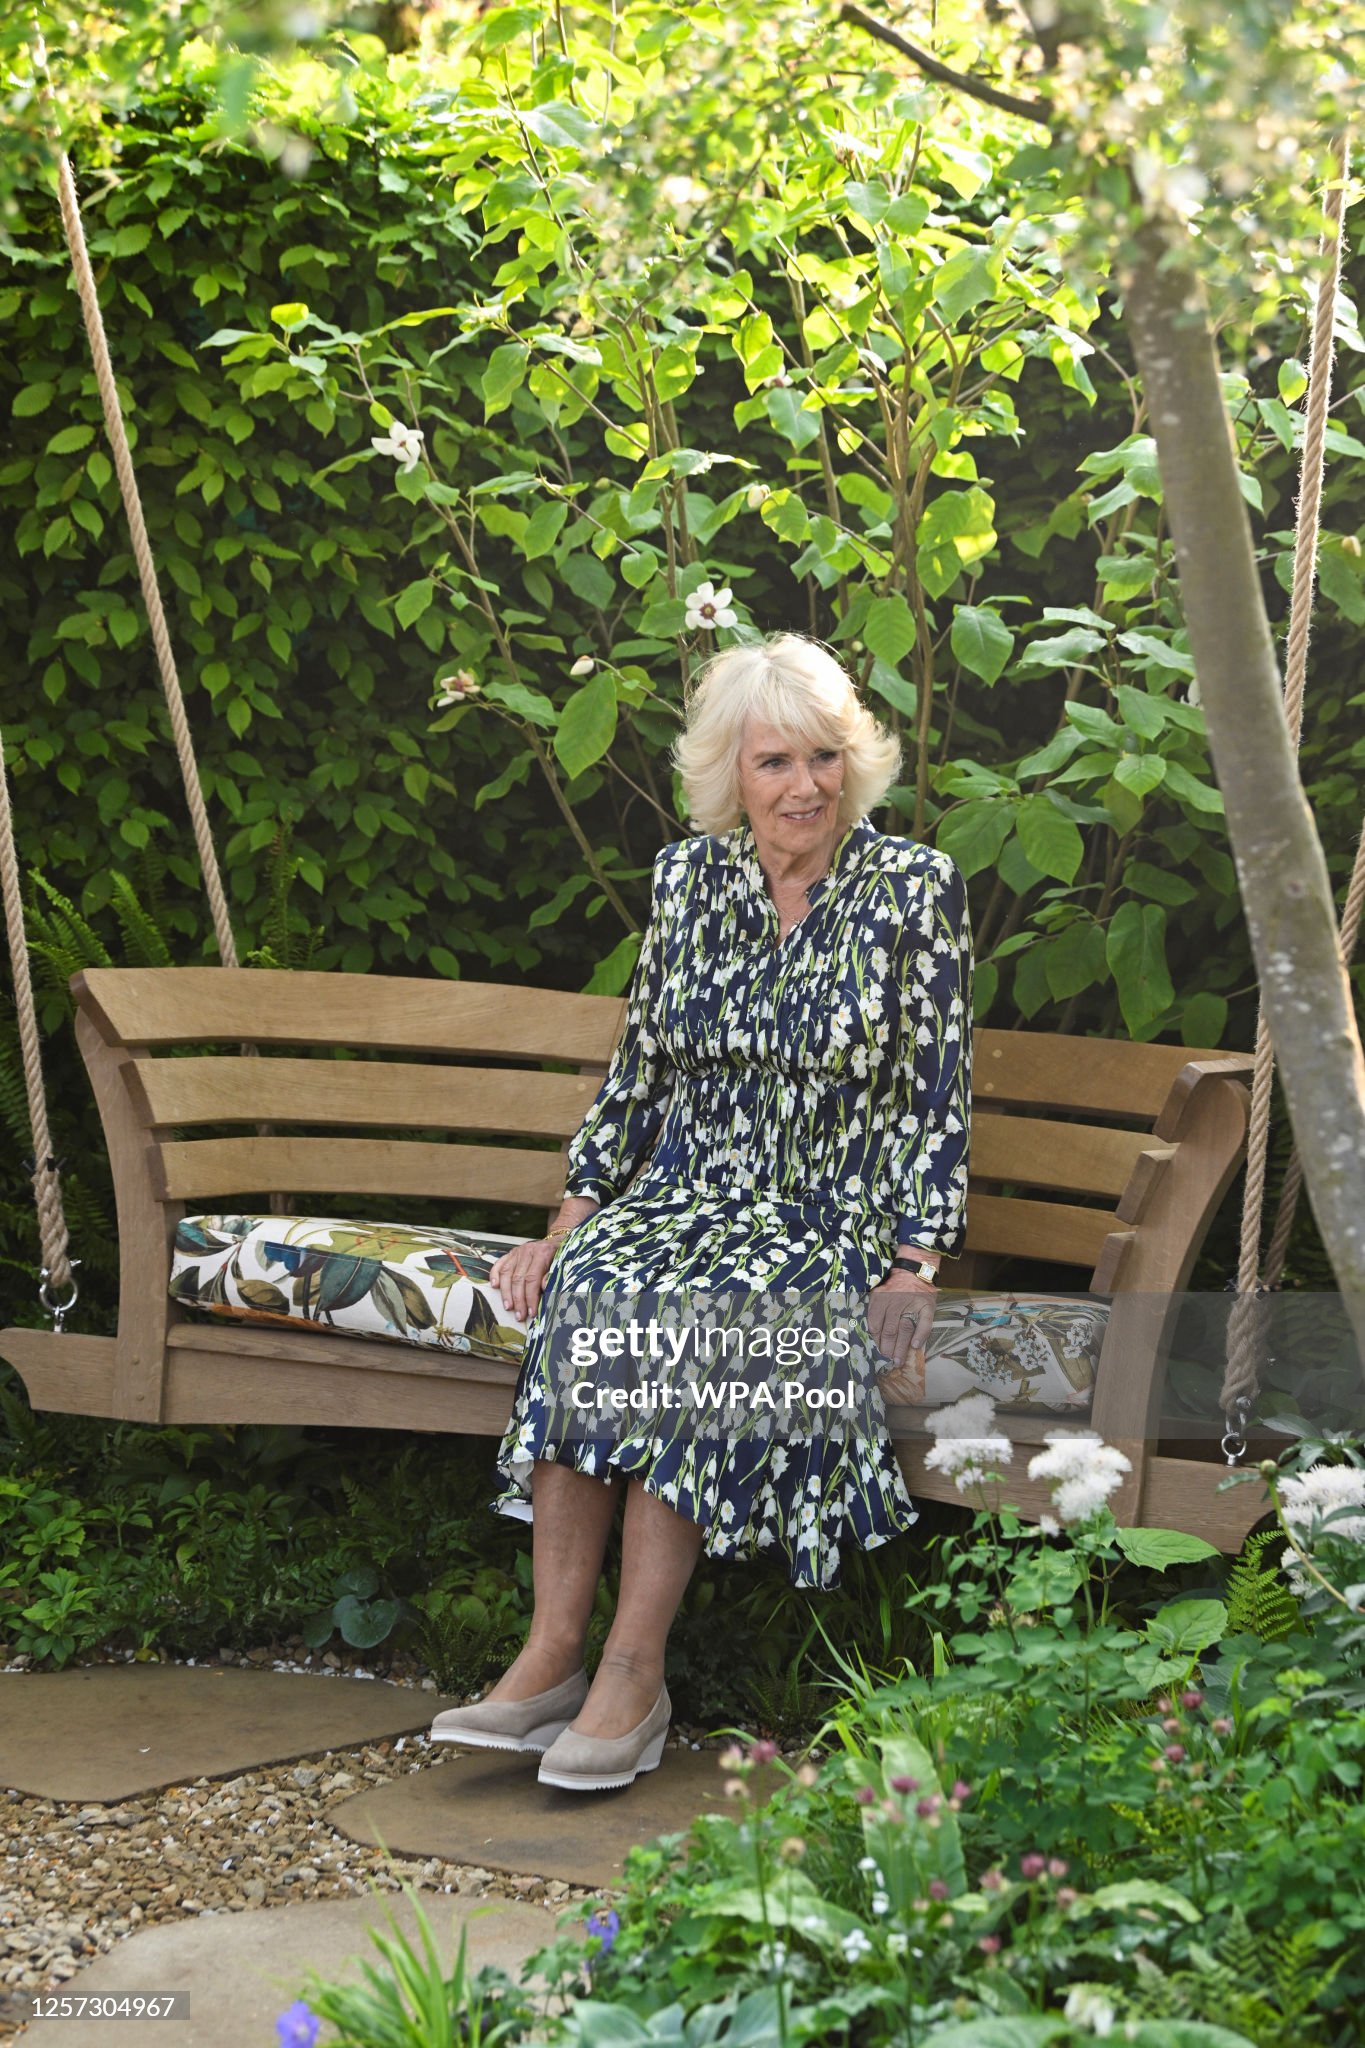 britains-queen-camilla-sits-on-a-swing-bench-in-london-square-community-garden-at-chelsea.jpg